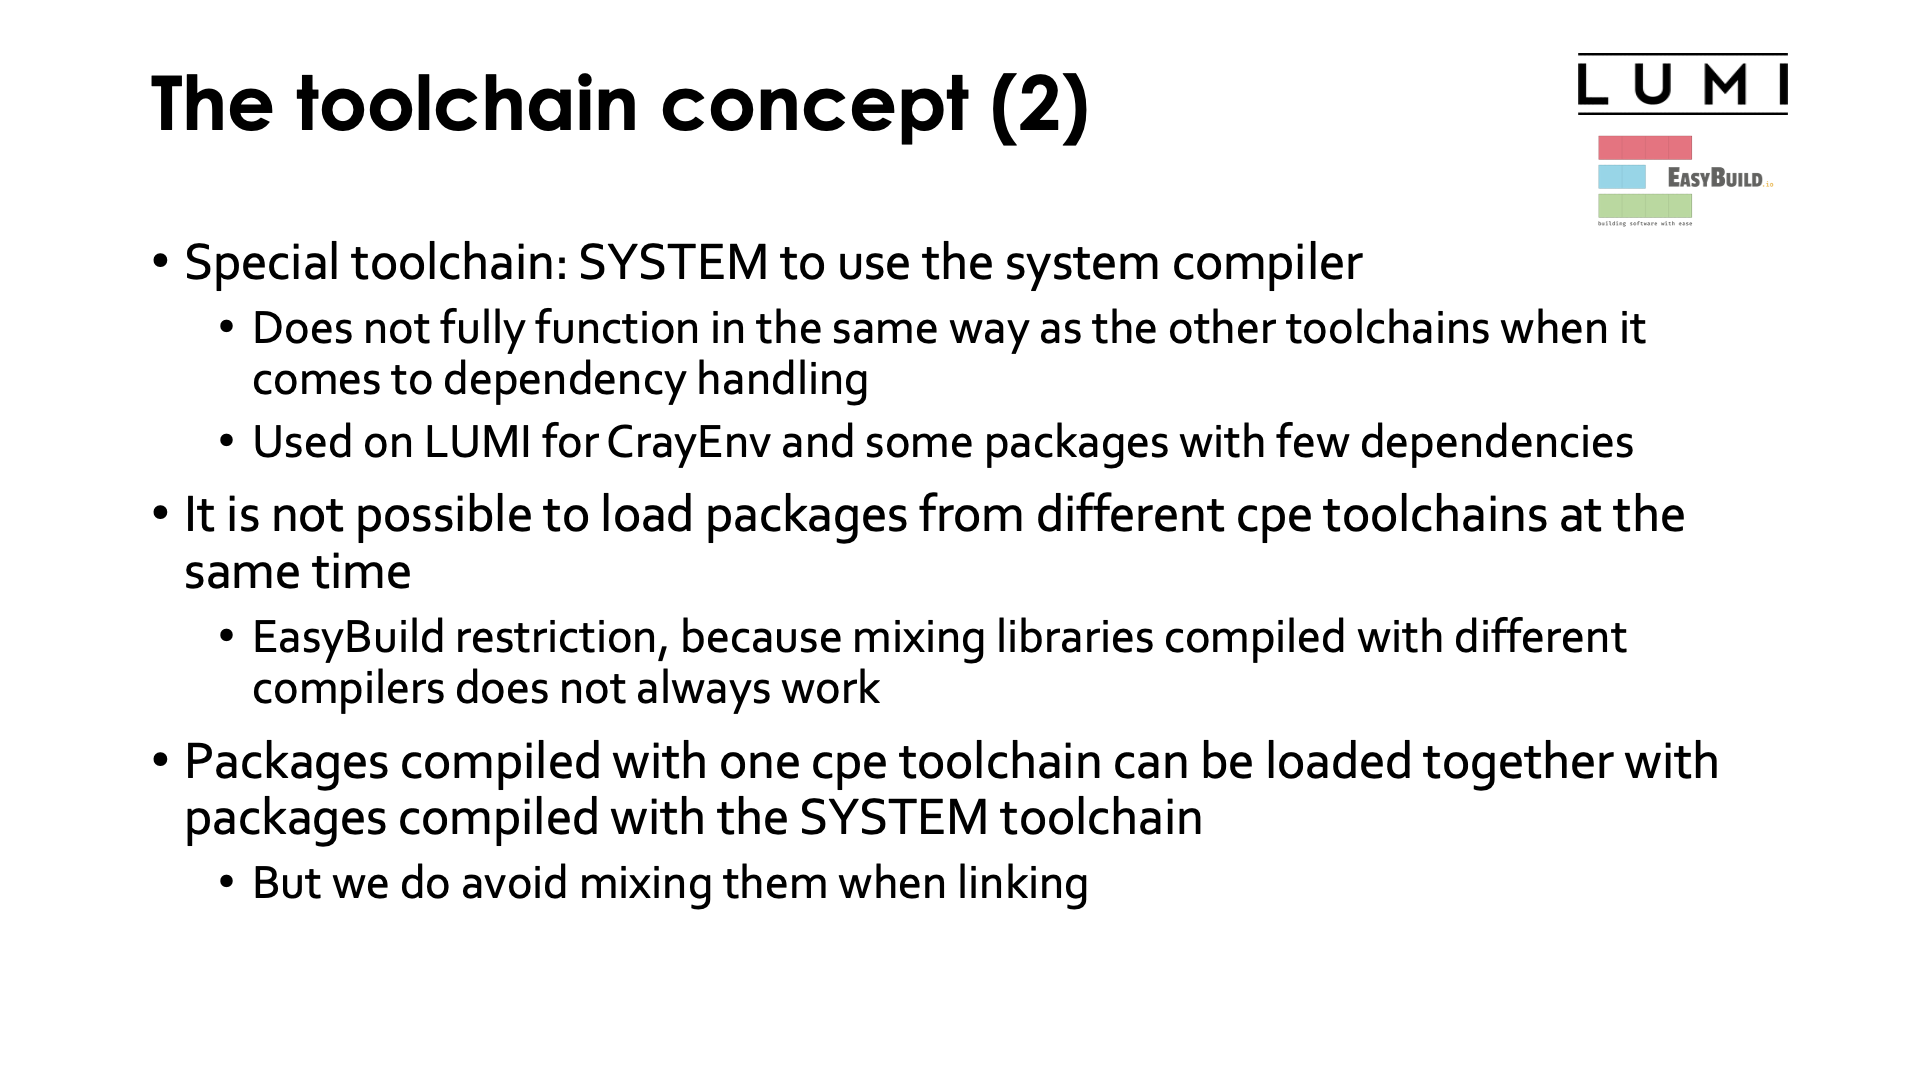 The toolchain concept 2